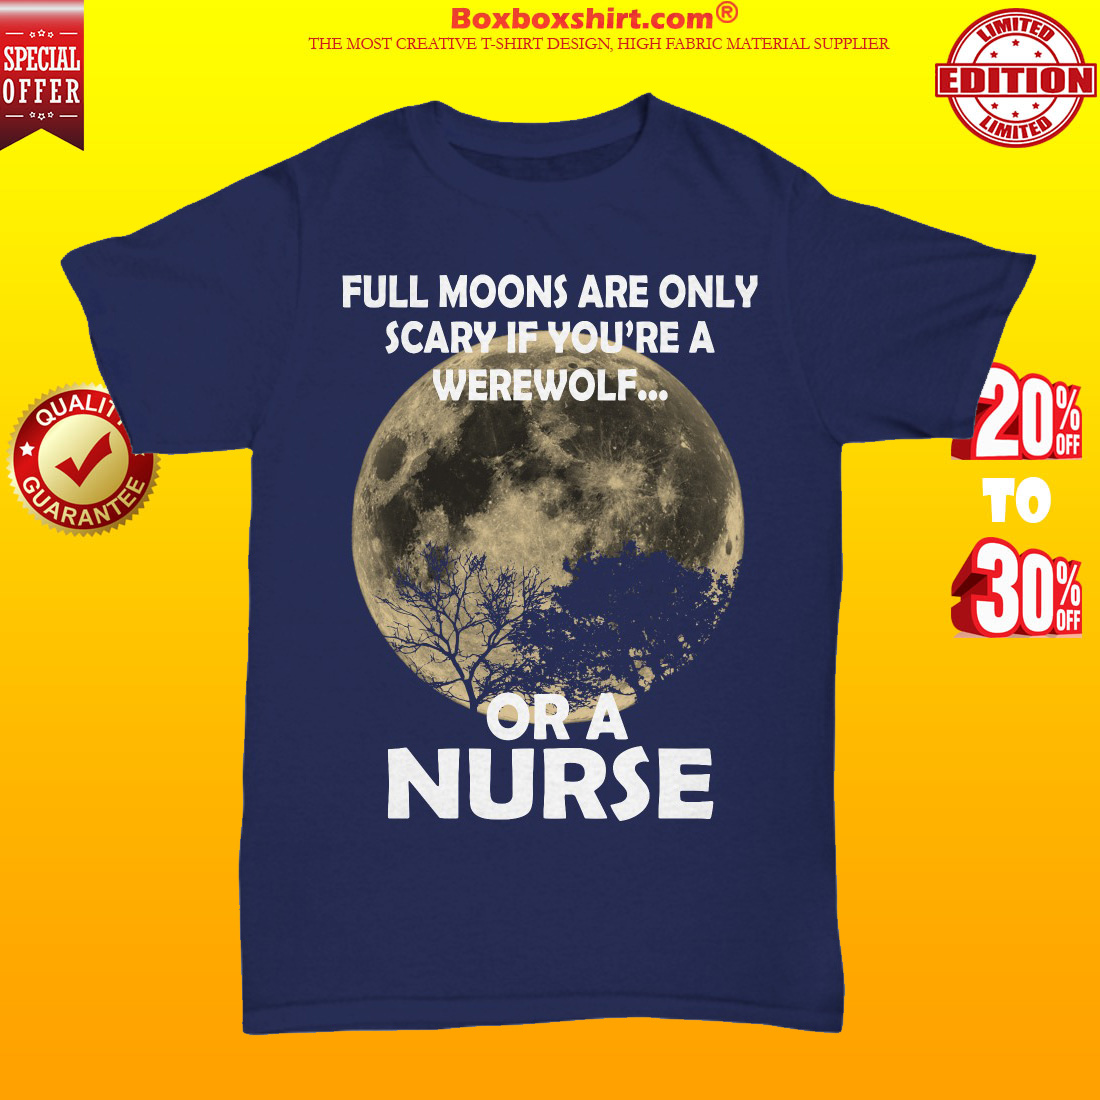 Full moons are only scary if you are a werewolf or a nurse unisex tee shirt